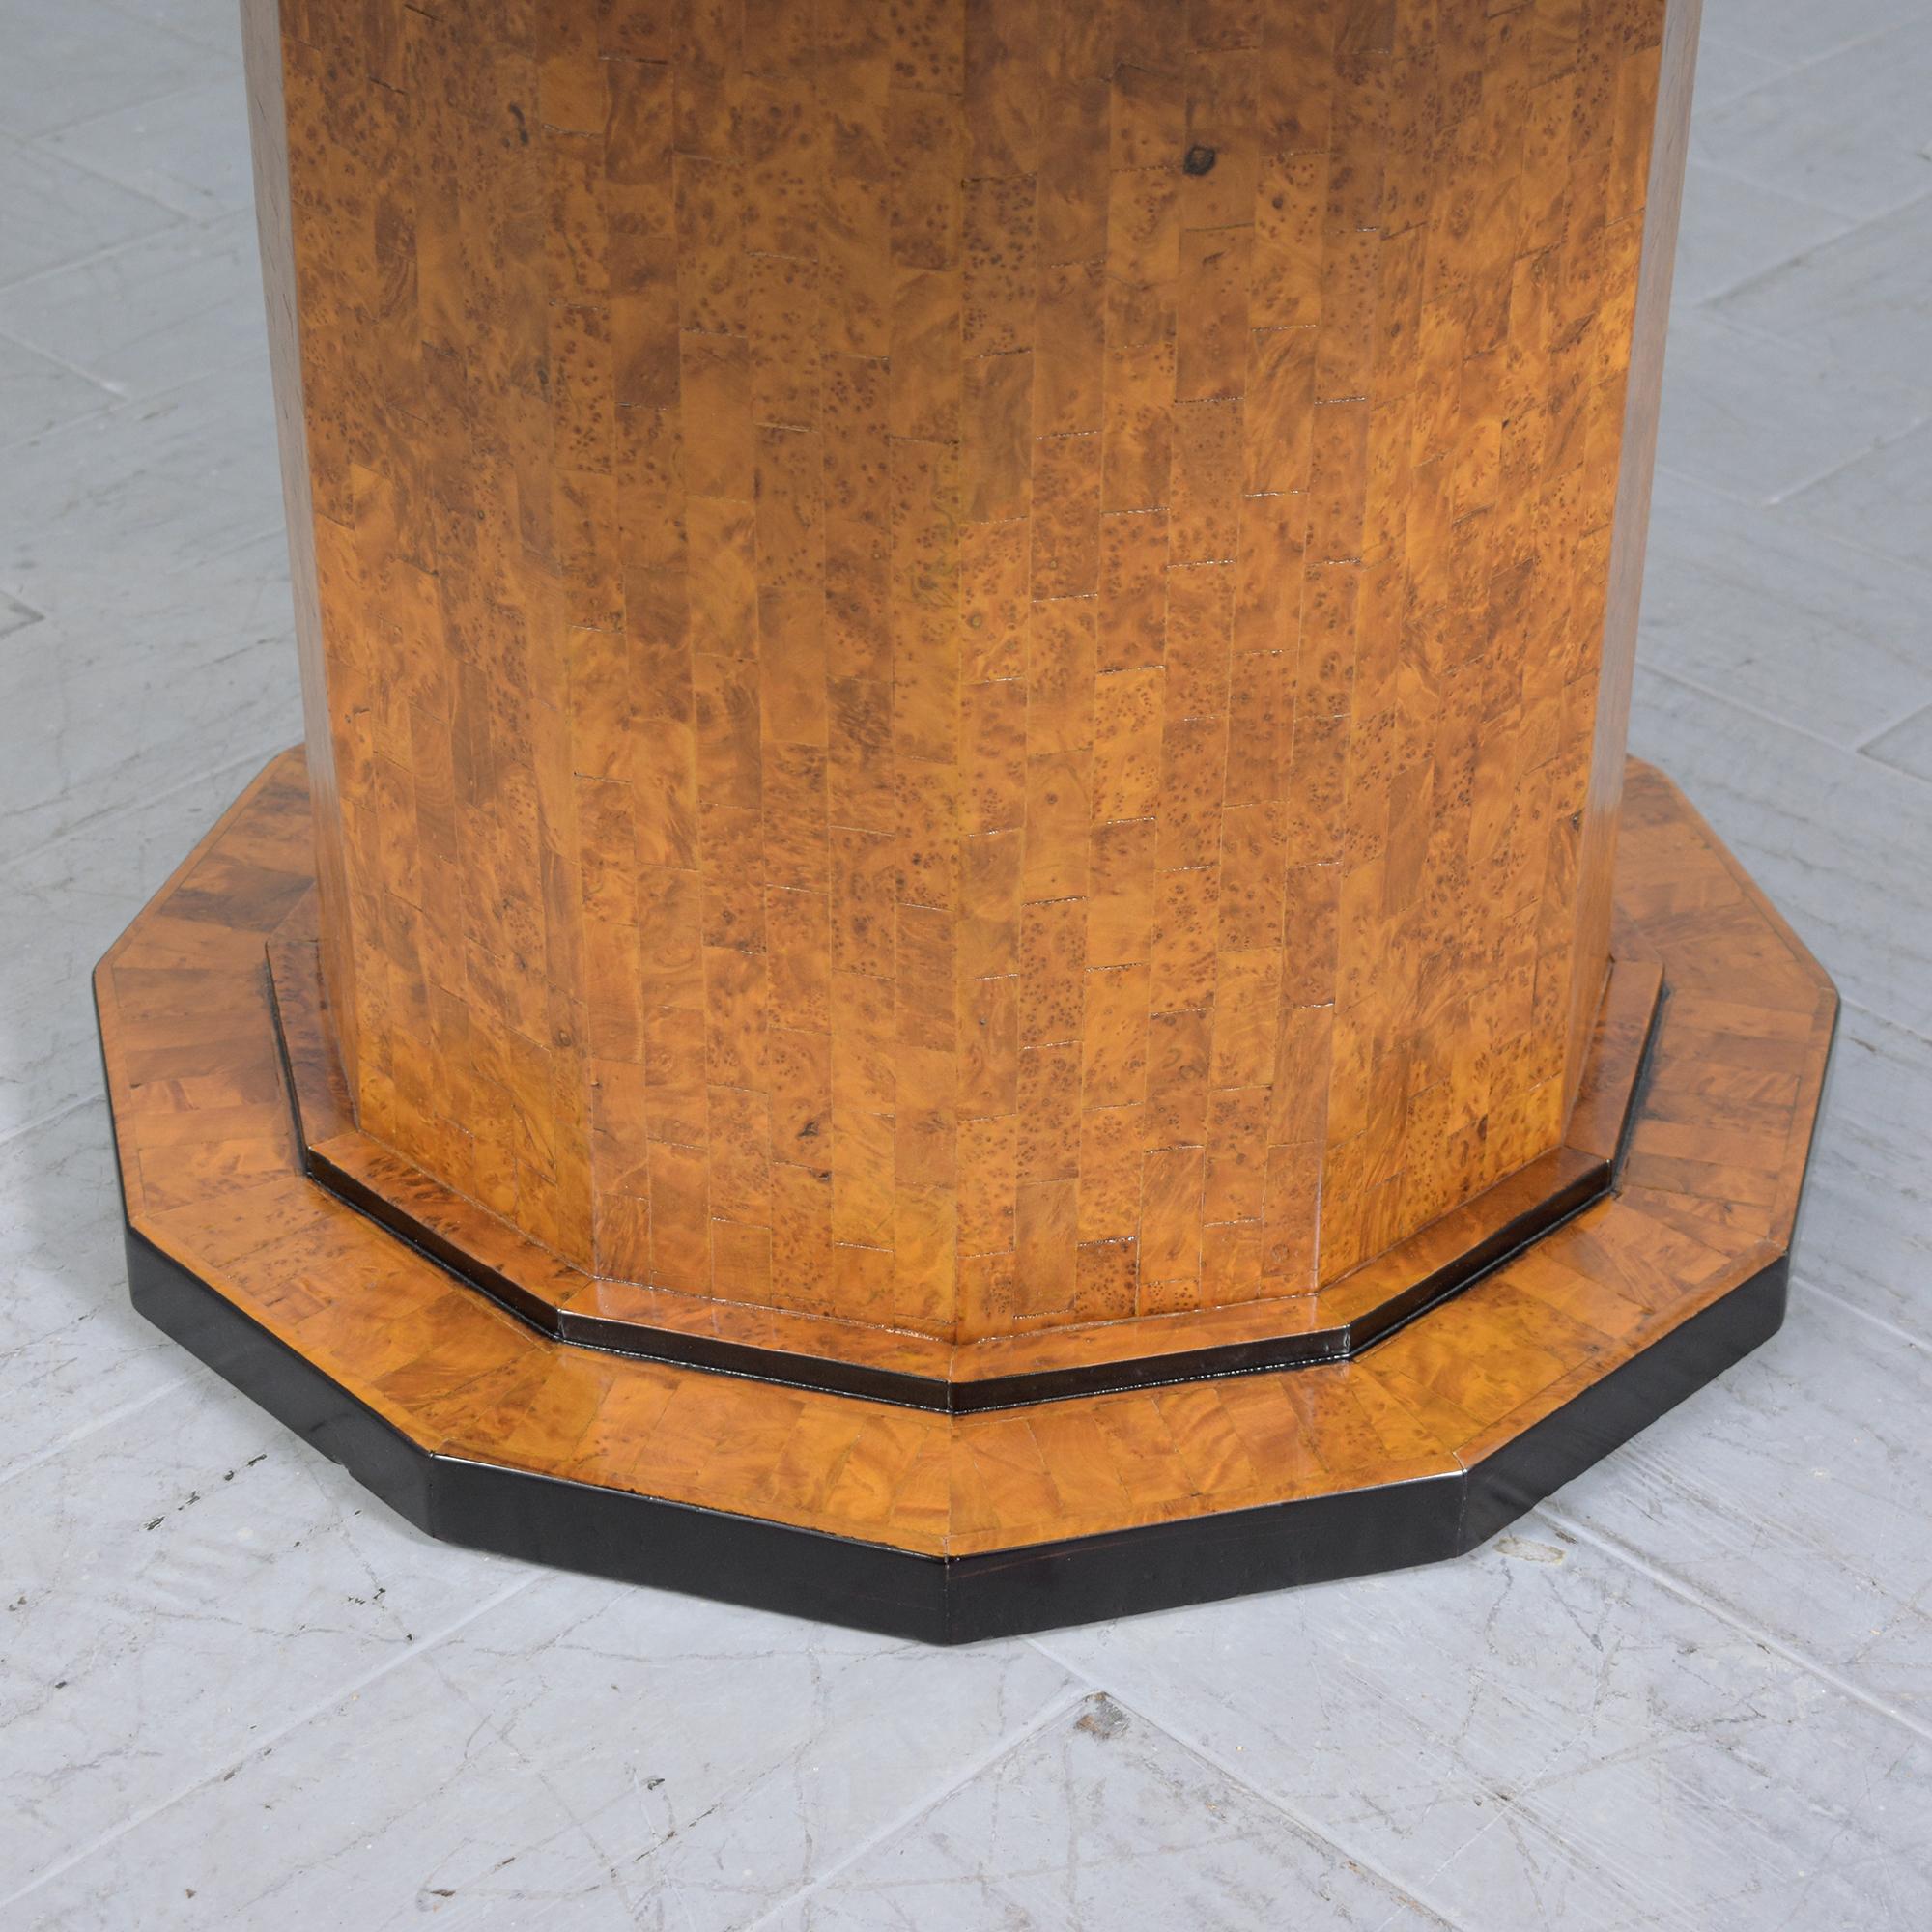 1880s Antique Walnut Center Table with Dodecagon Top and Mother-of-Pearl Inlays For Sale 3